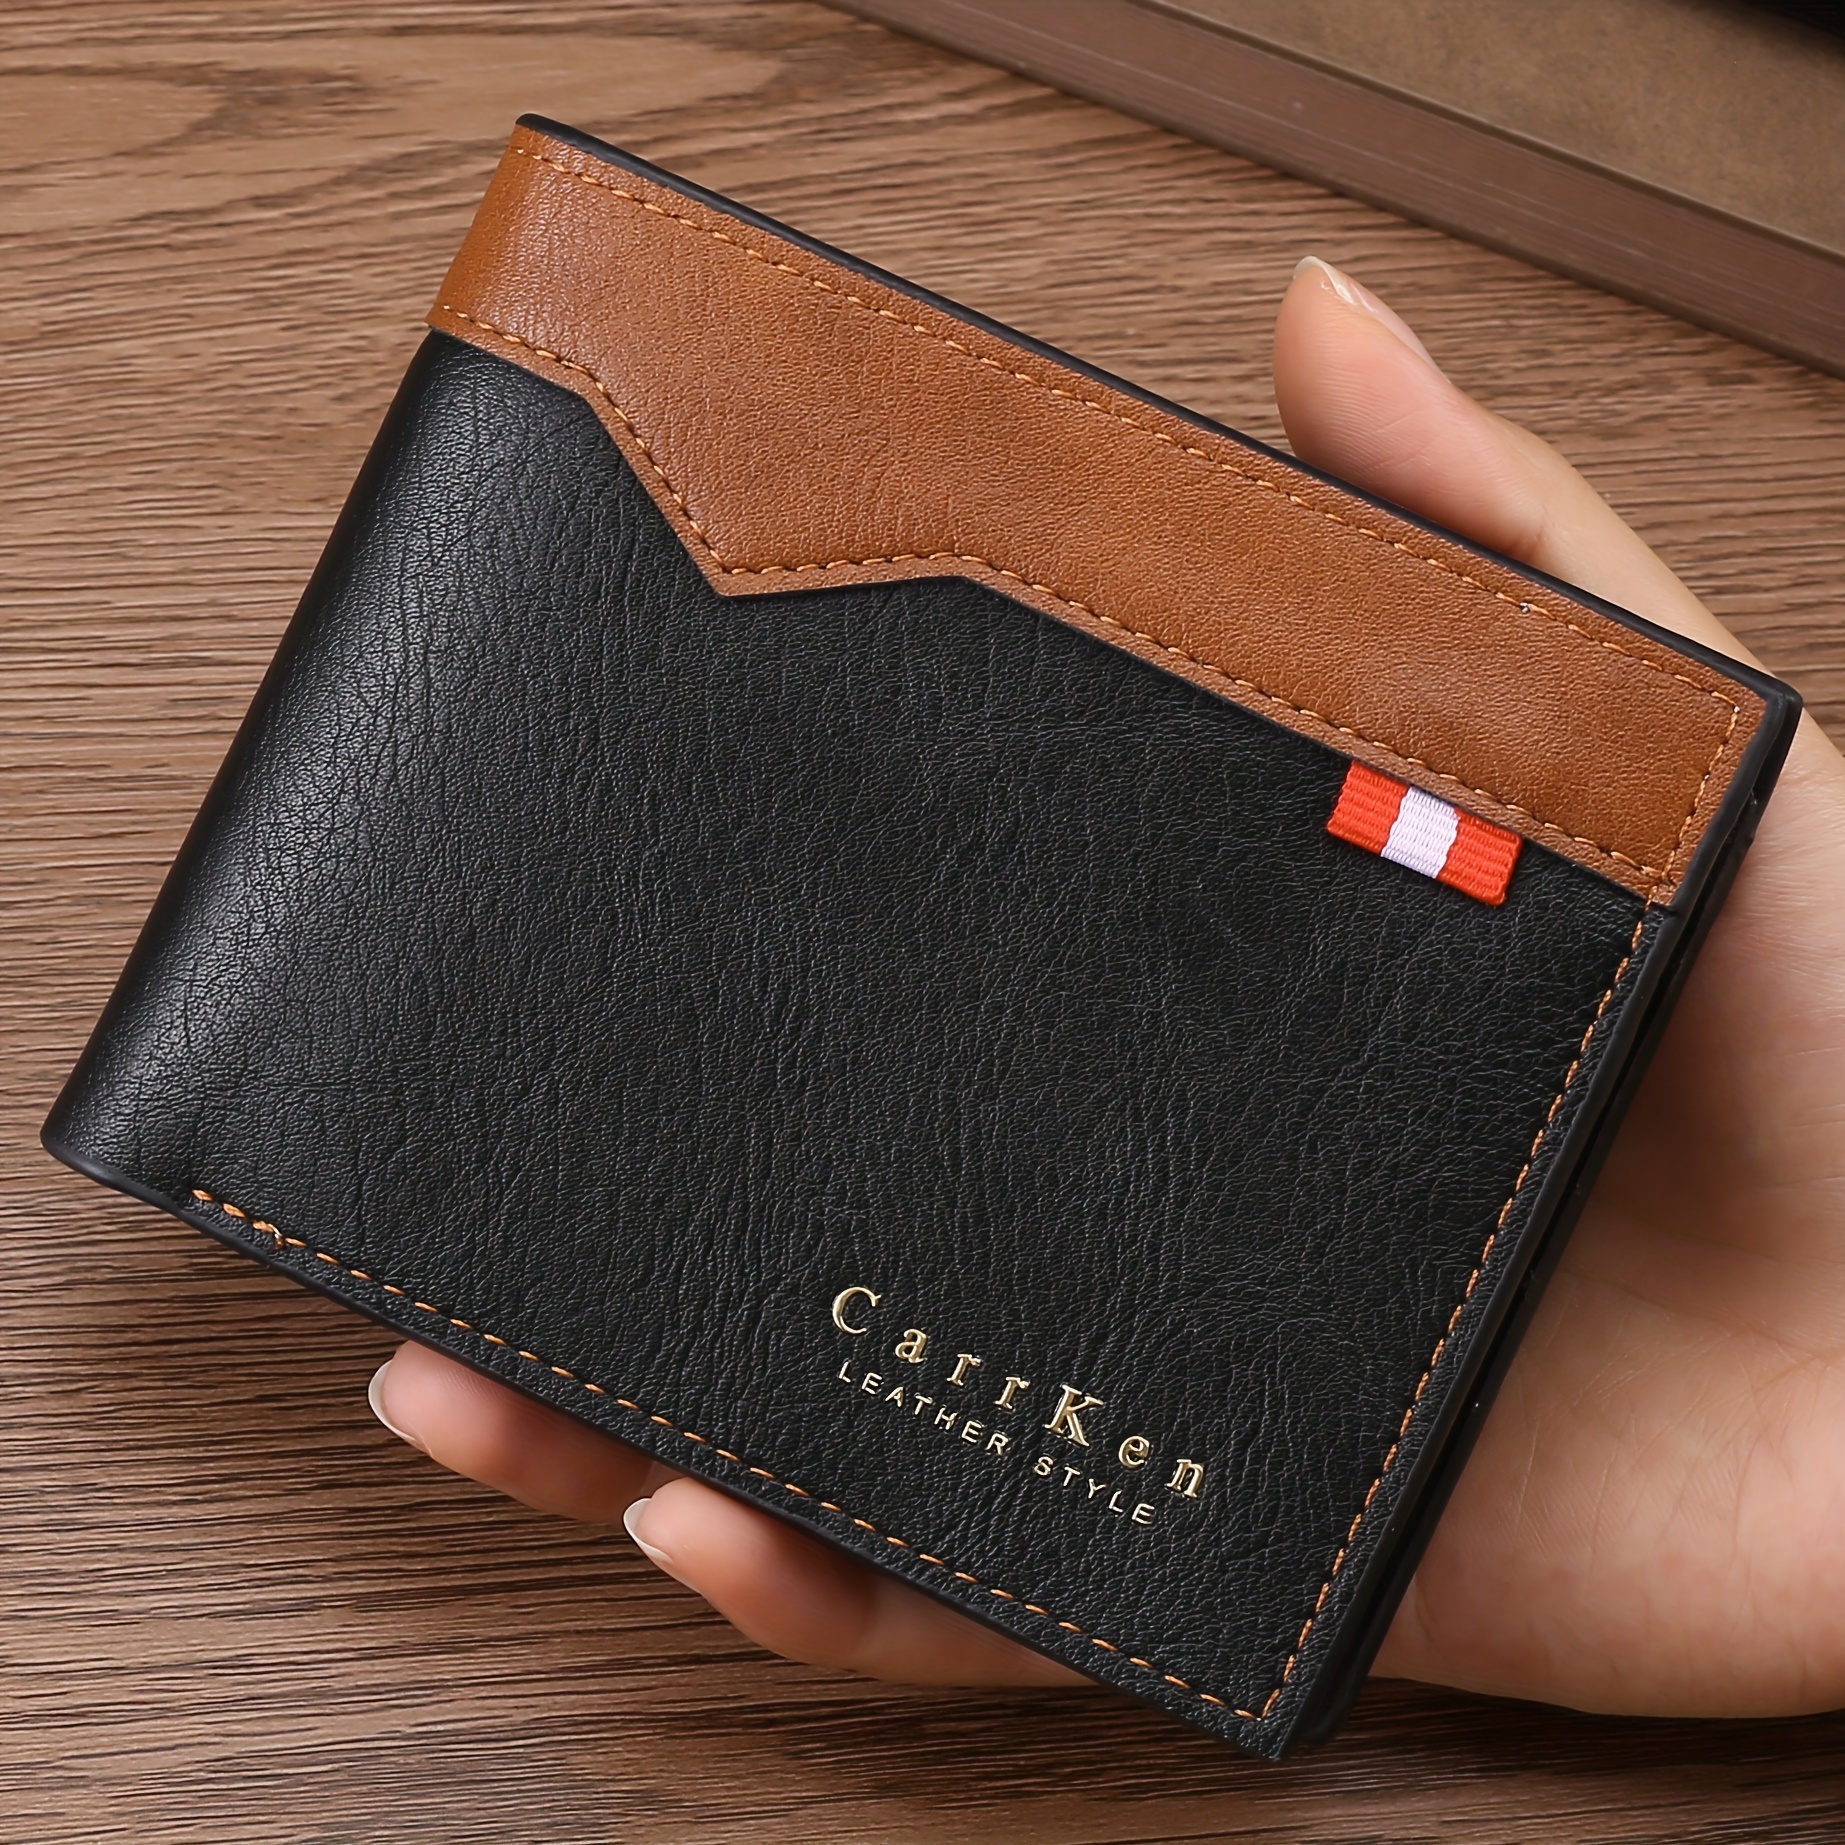 With box】 for Men New Folding Wallet classic Temperament y Fashion Birthday  Gift M63801 Size:10.5x8cm